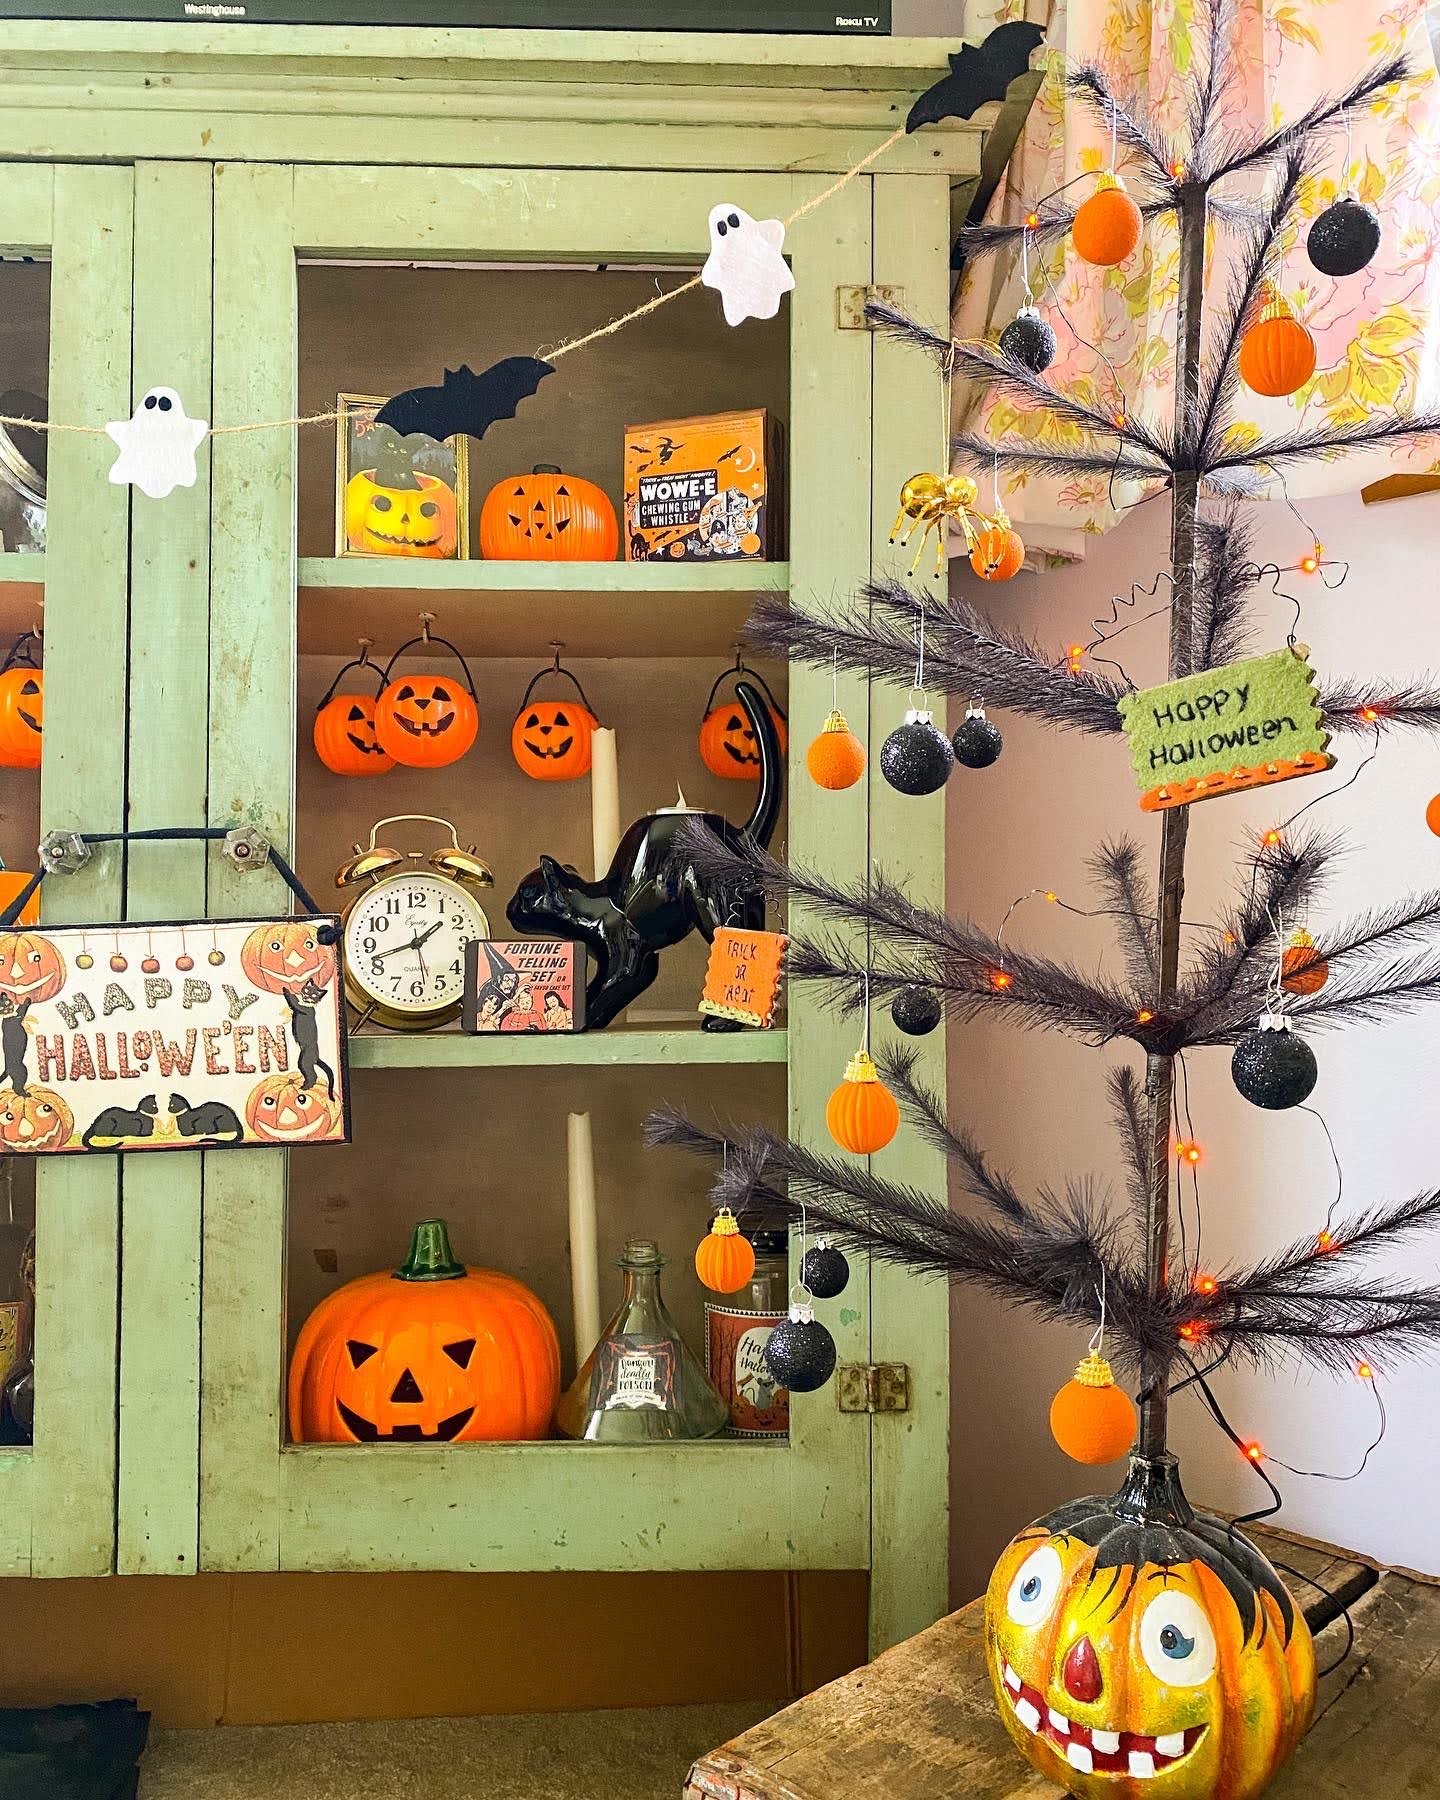 10 Vintage Halloween and Fall DIY Craft Ideas — Emily Retro - Vintage and DIY Home Design